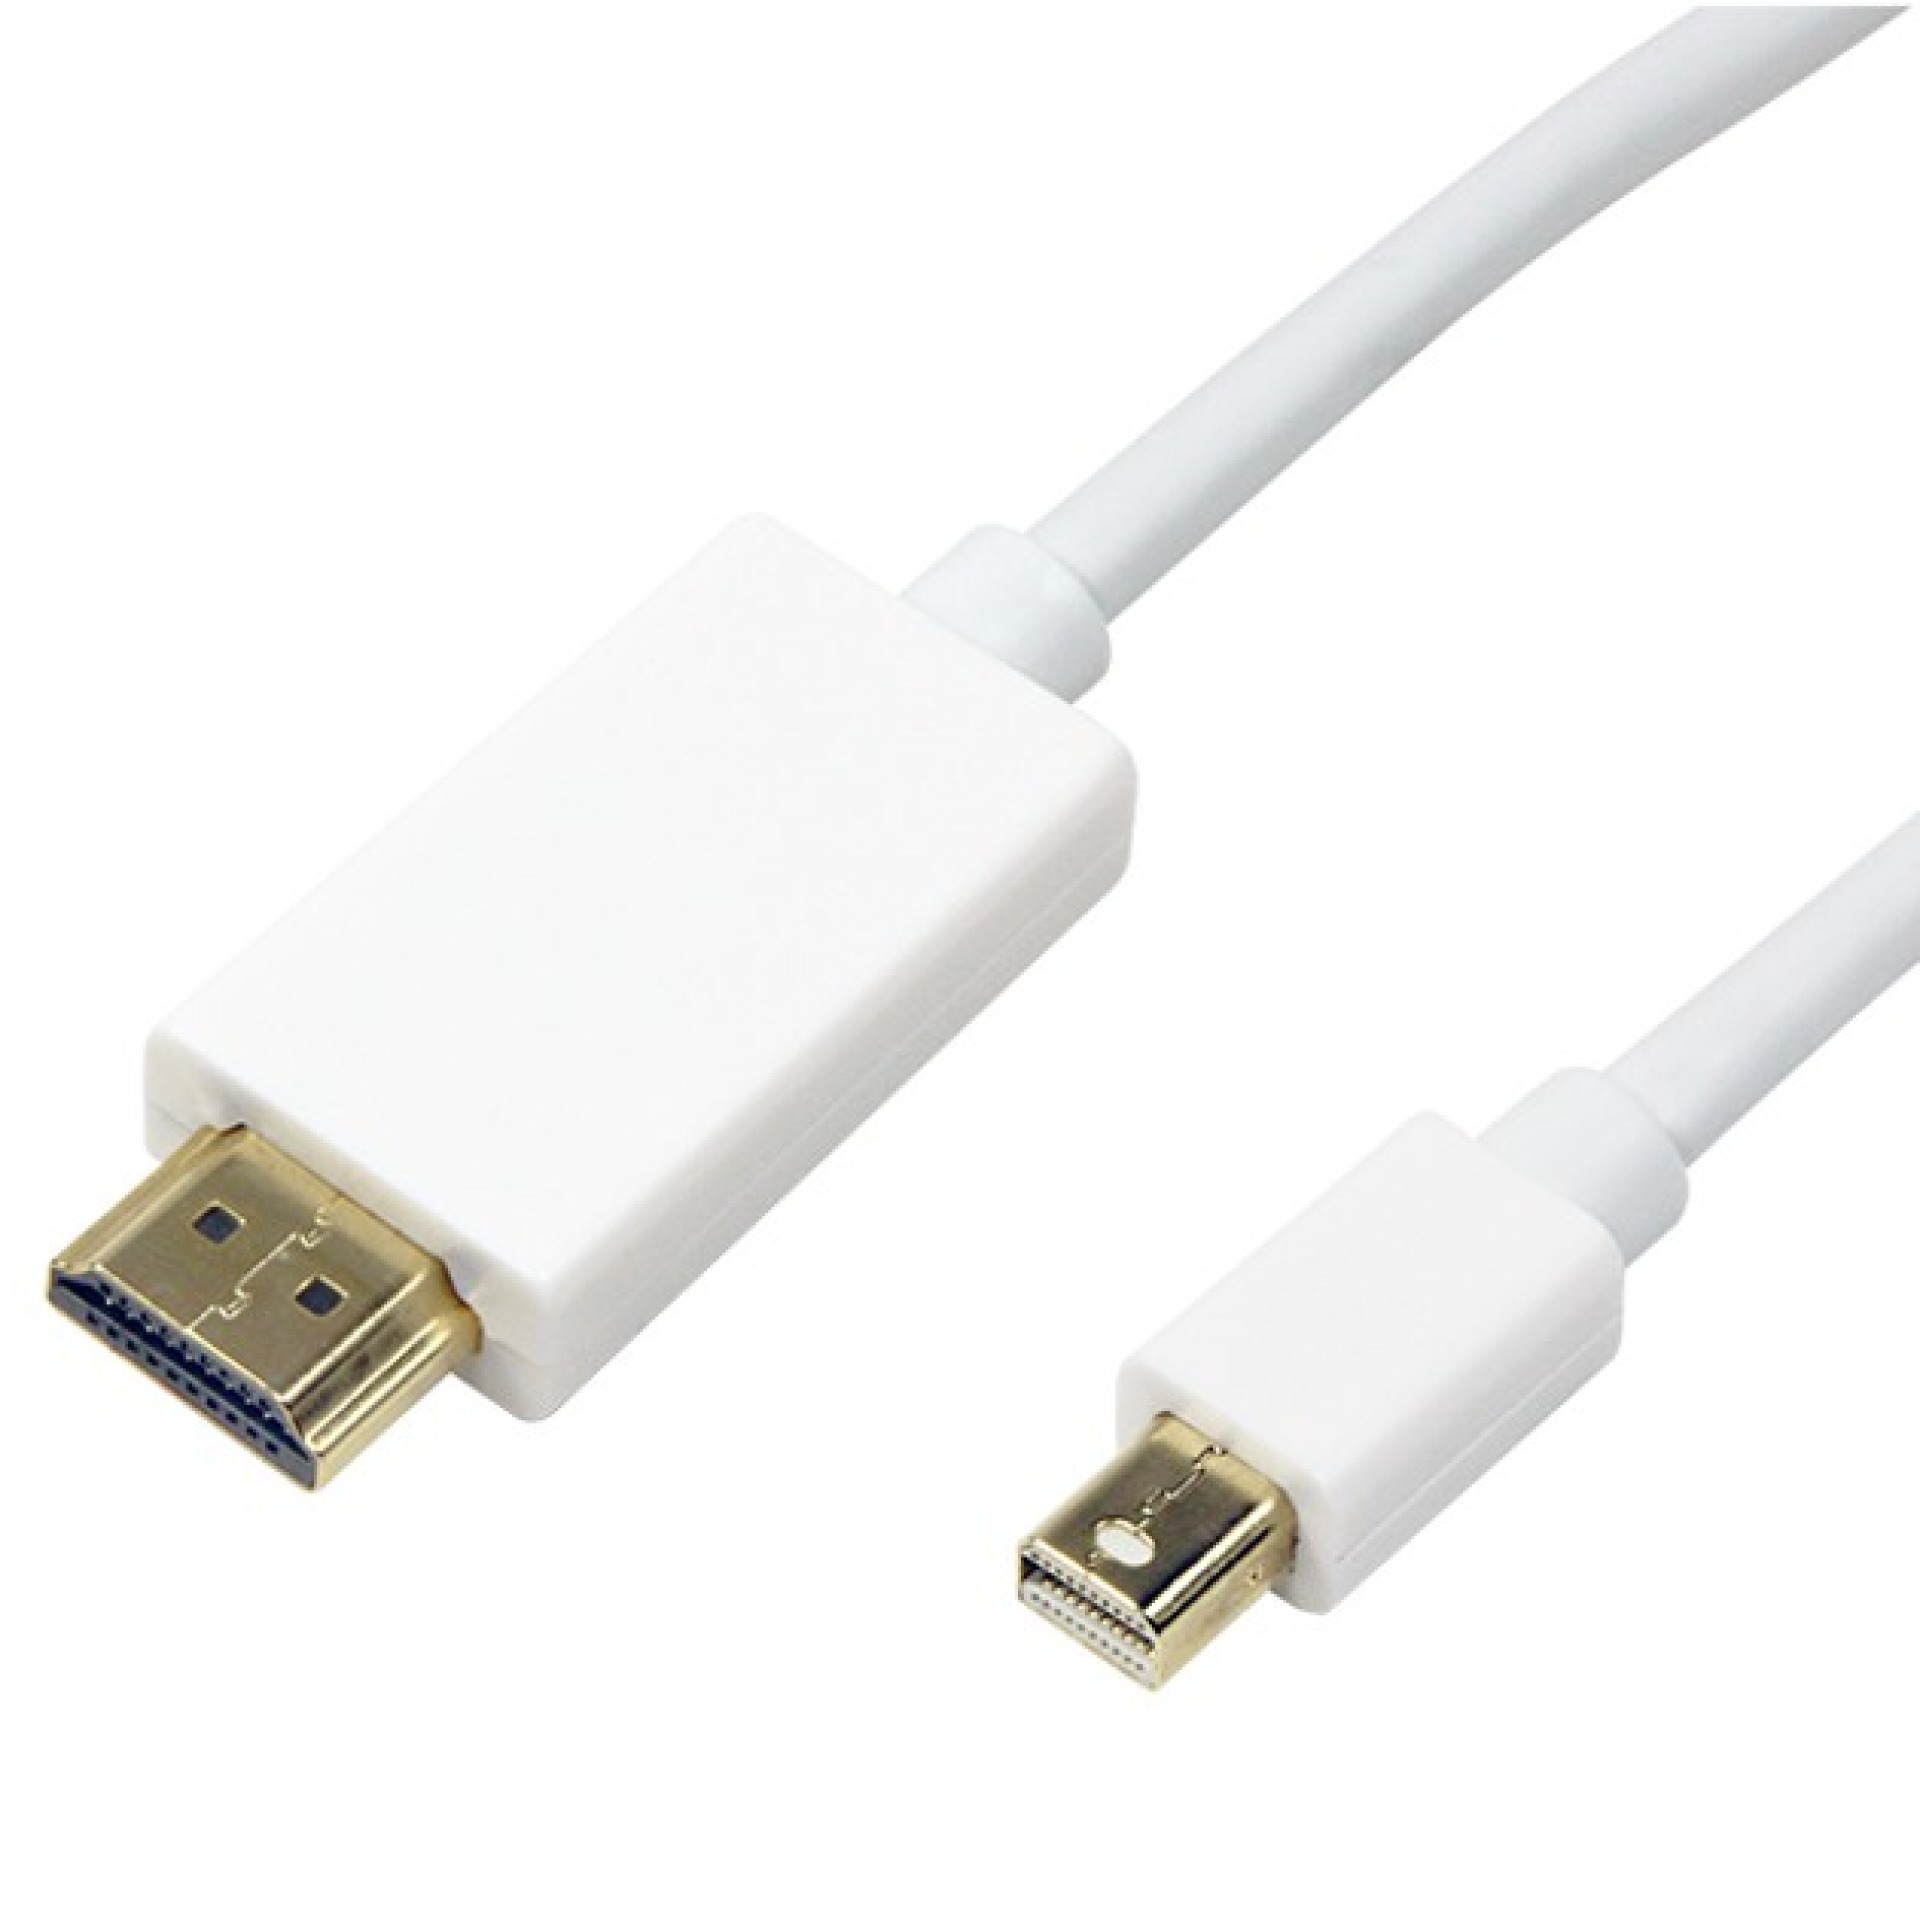 Mini-DisplayPort (Thunderbolt) Connection Cable to HDMI, M-M, white, 2m